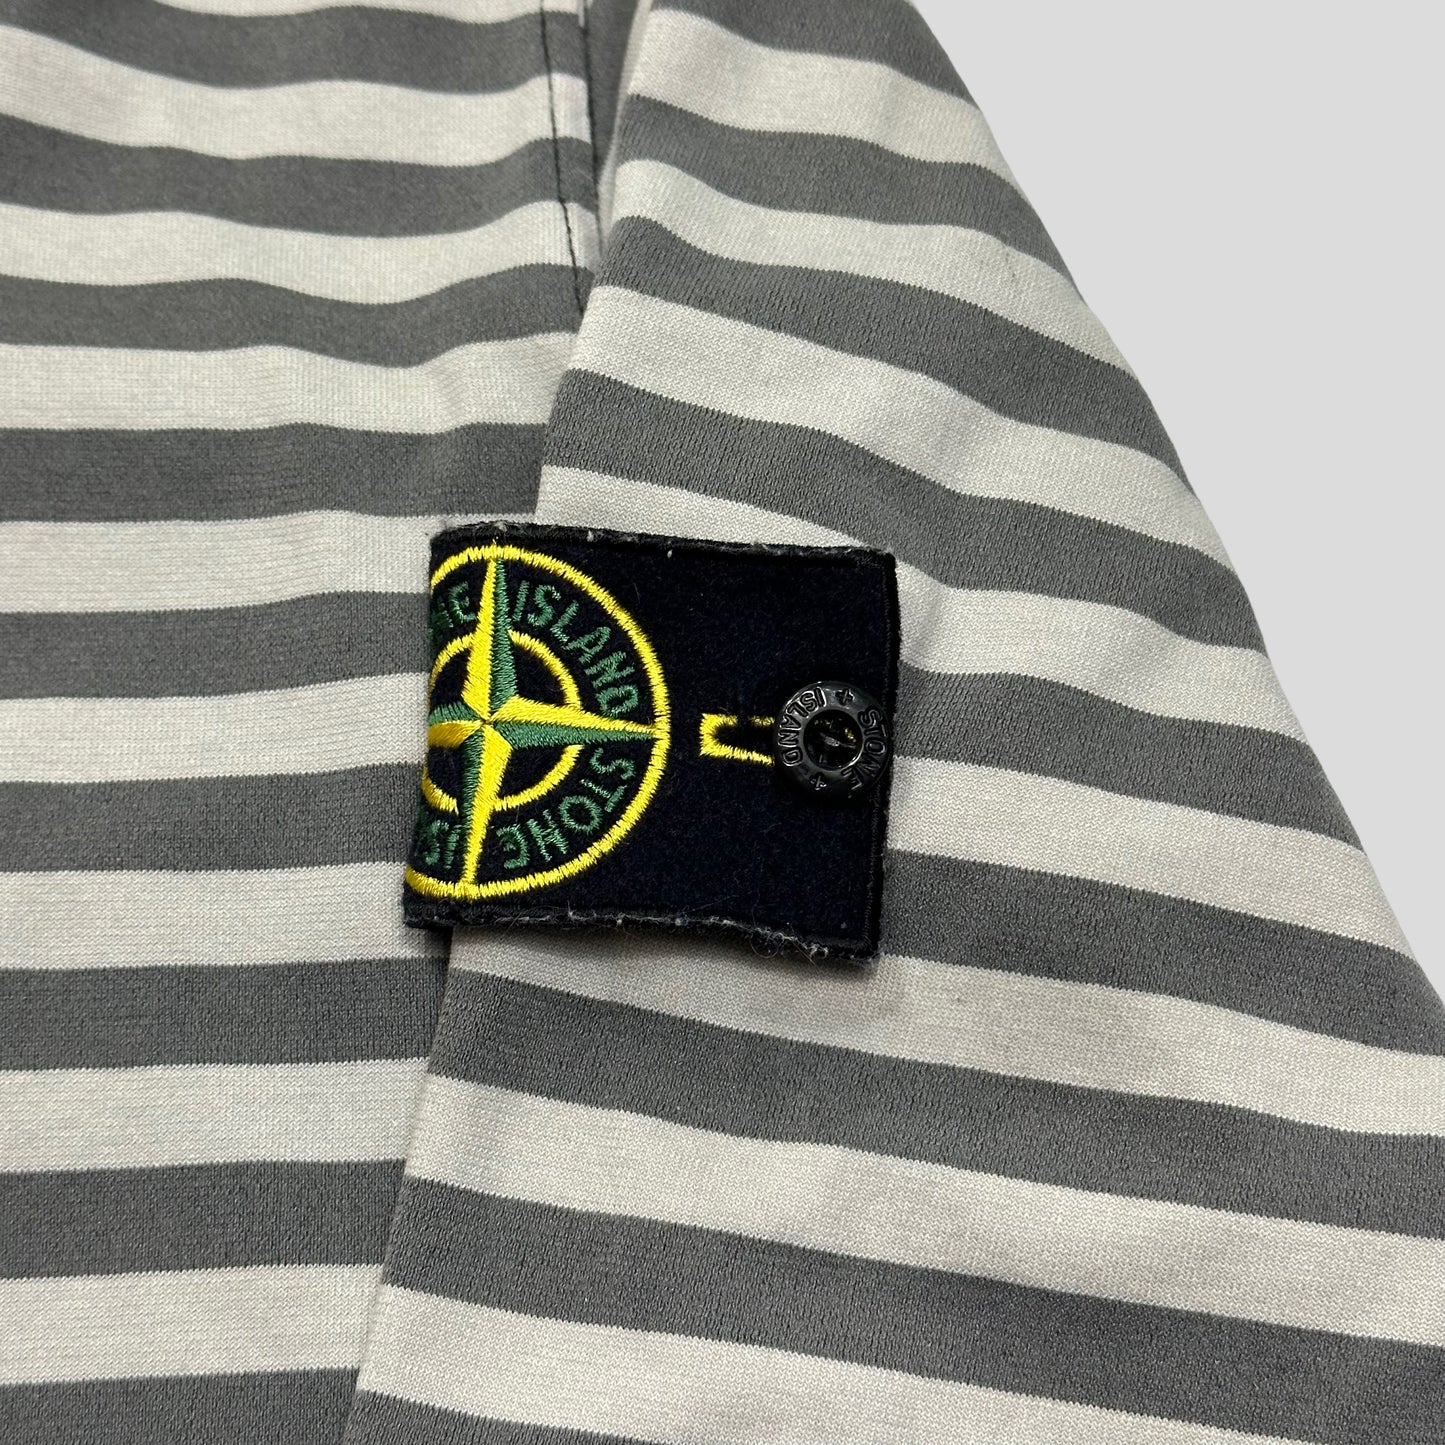 Stone Island SS08 Striped Pullover Hoodie - XL